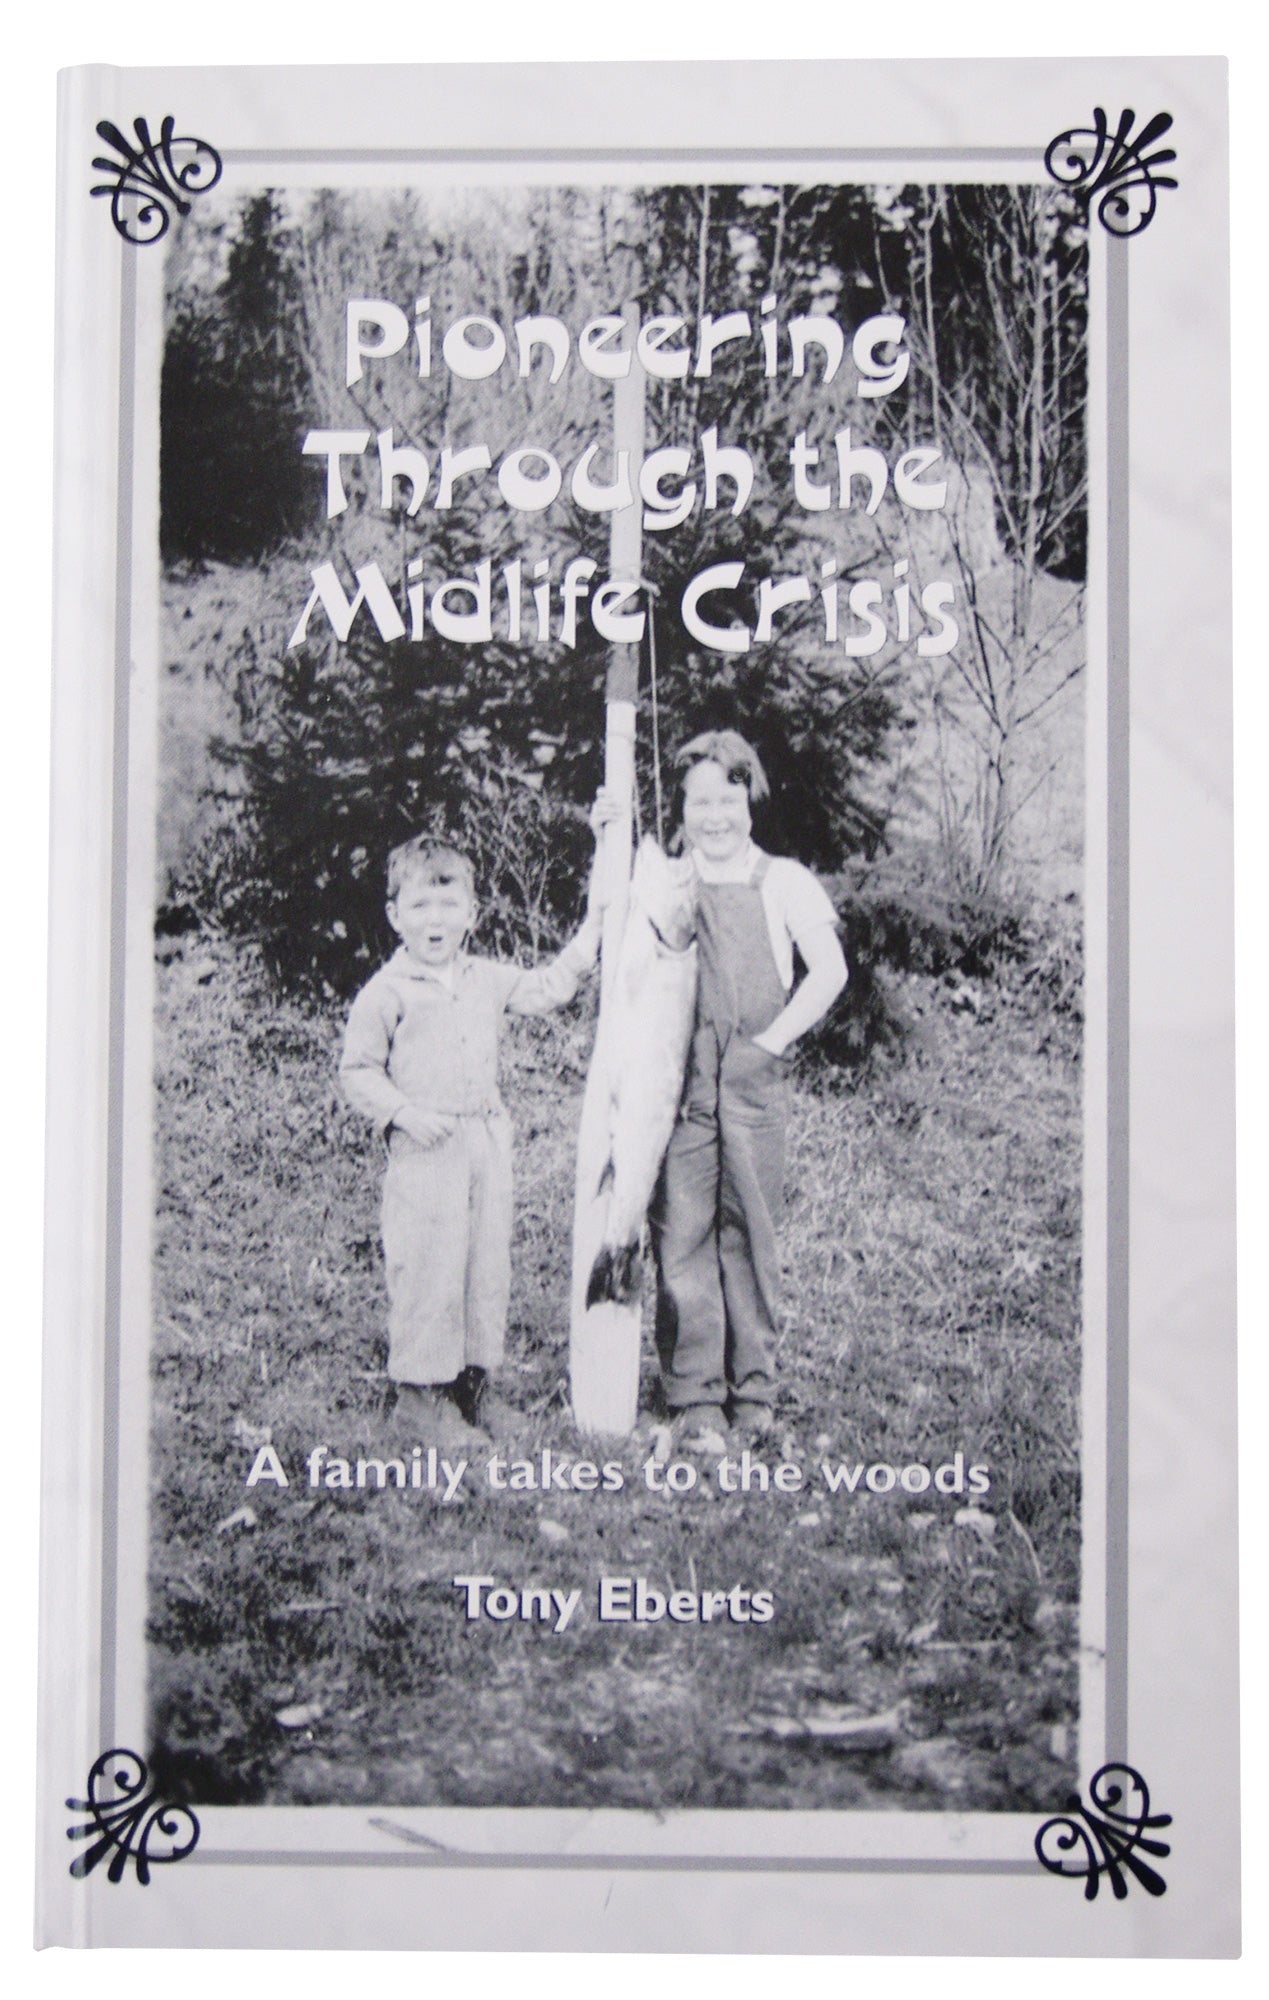 A photo of two children standing next to a tree. Text over the image says "Pioneering Through the Midlife Crisis. A family takes to the woods. Tony Eberts." End of image description.